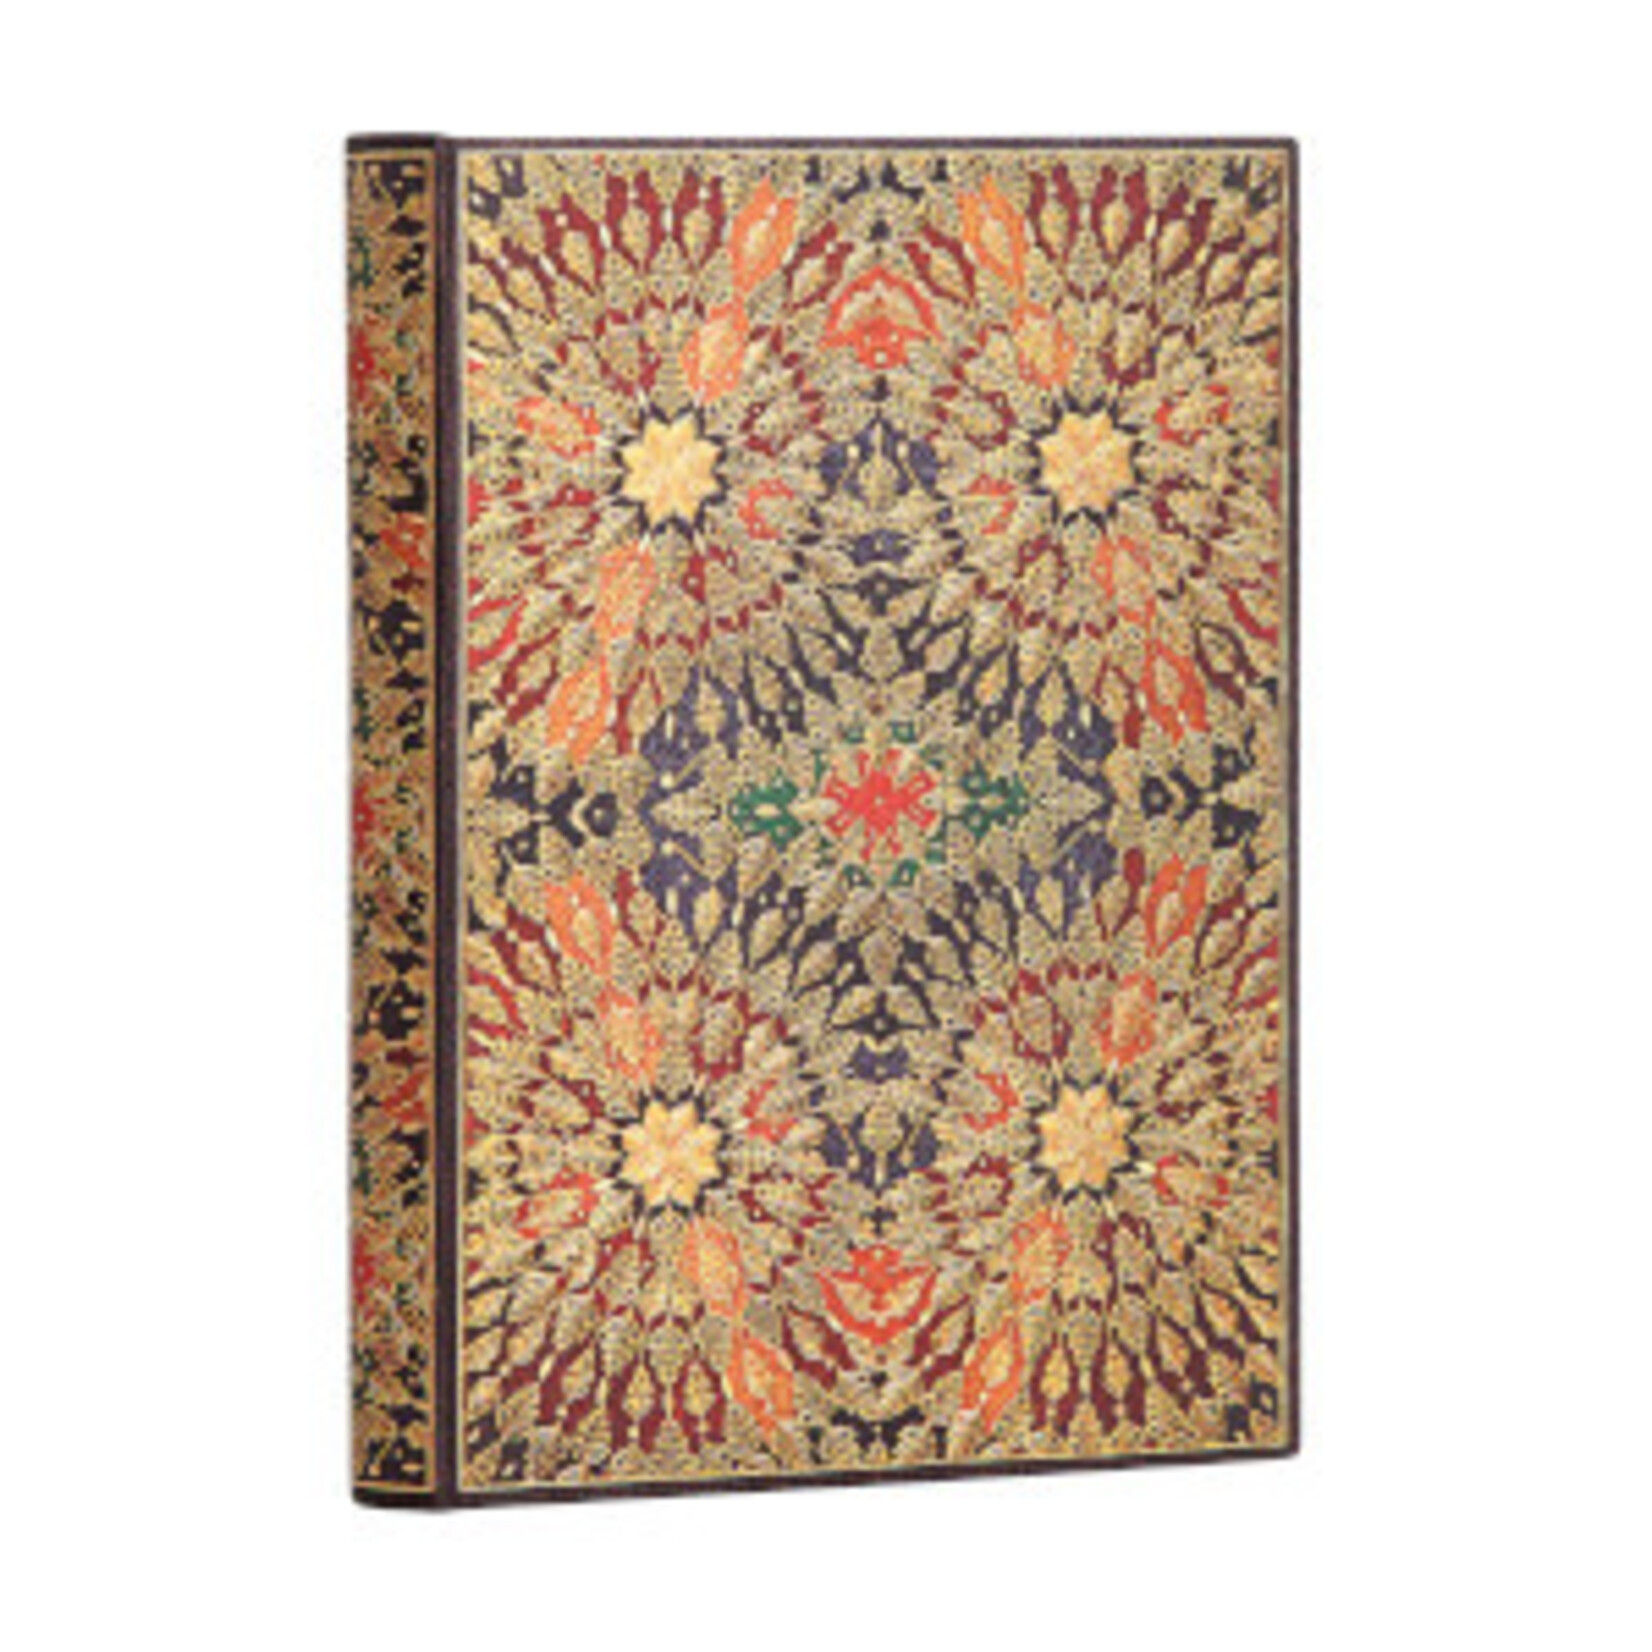 Paperblanks Journals Fire Flowers Midi Lined